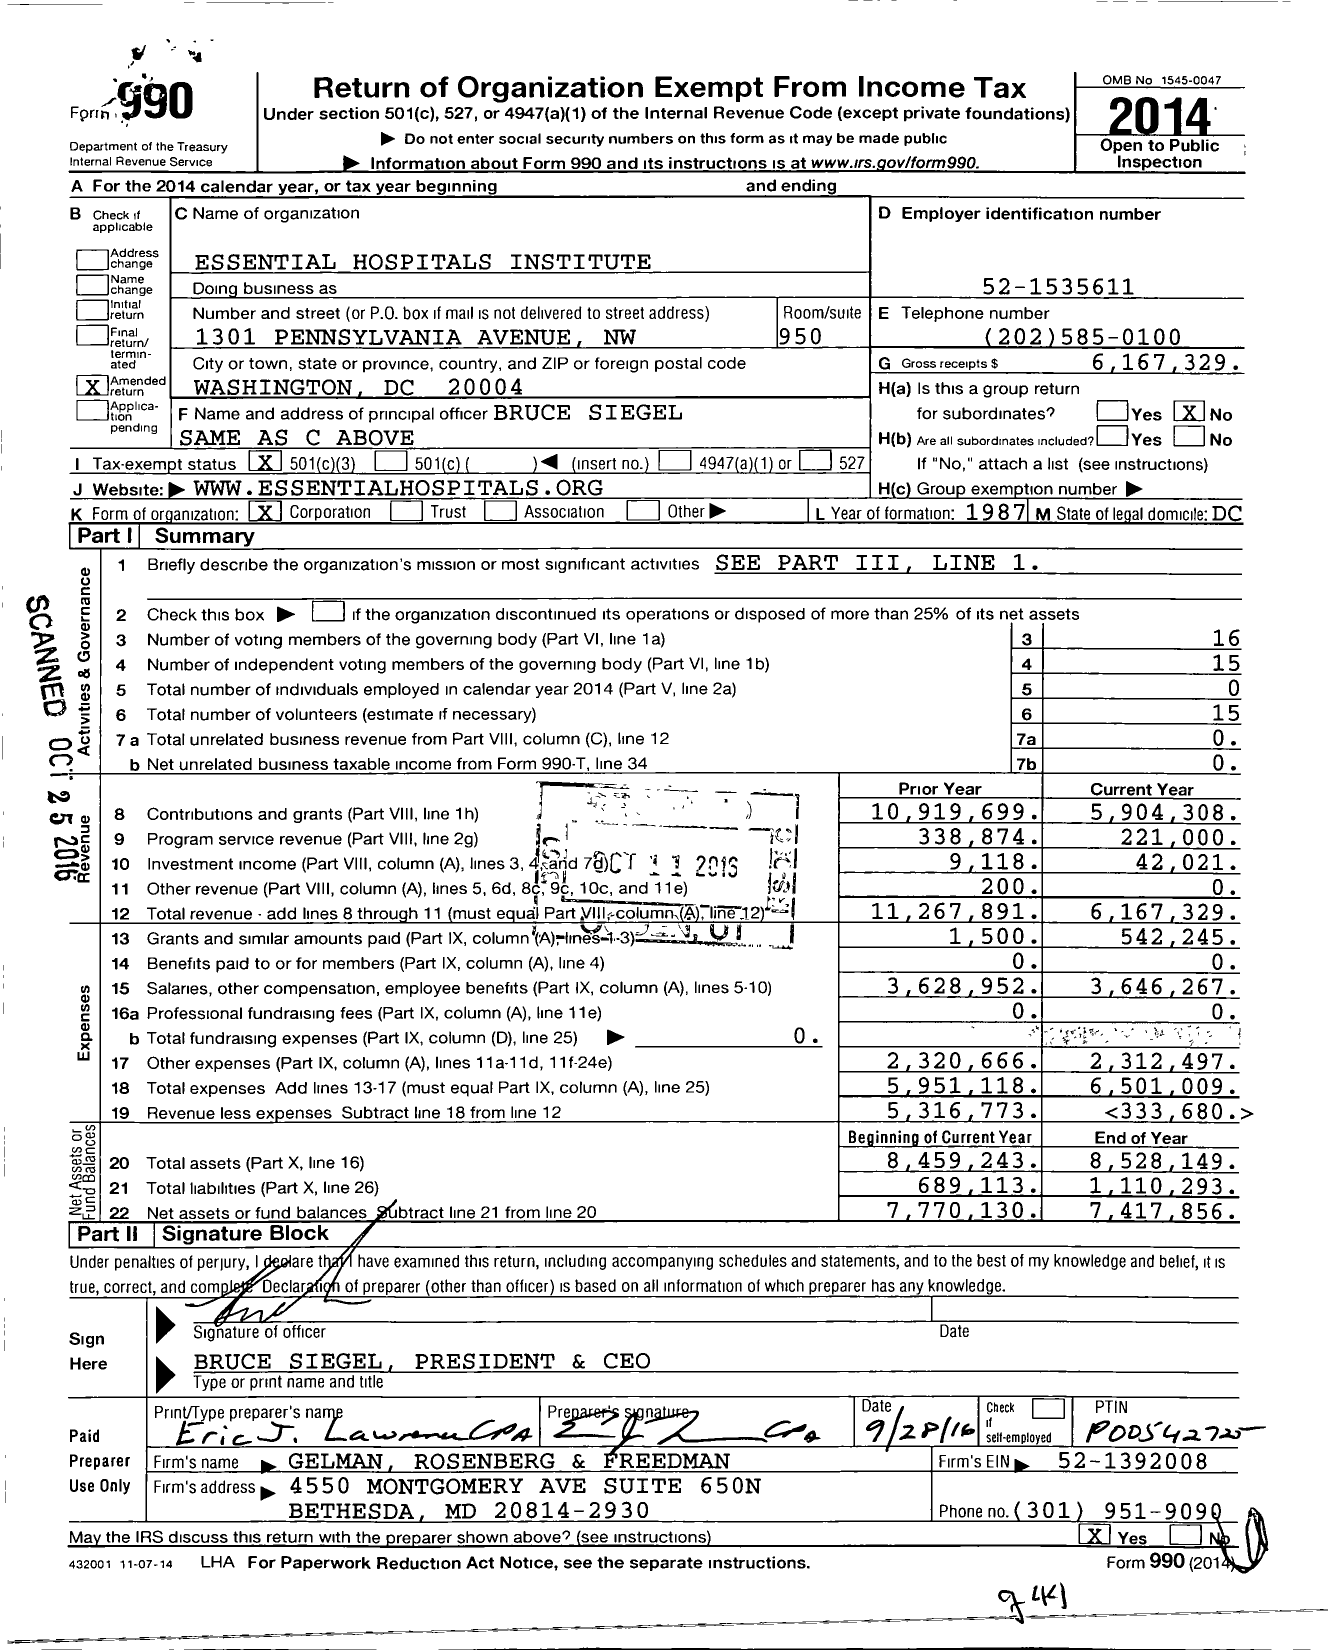 Image of first page of 2014 Form 990 for Essential Hospitals Institute